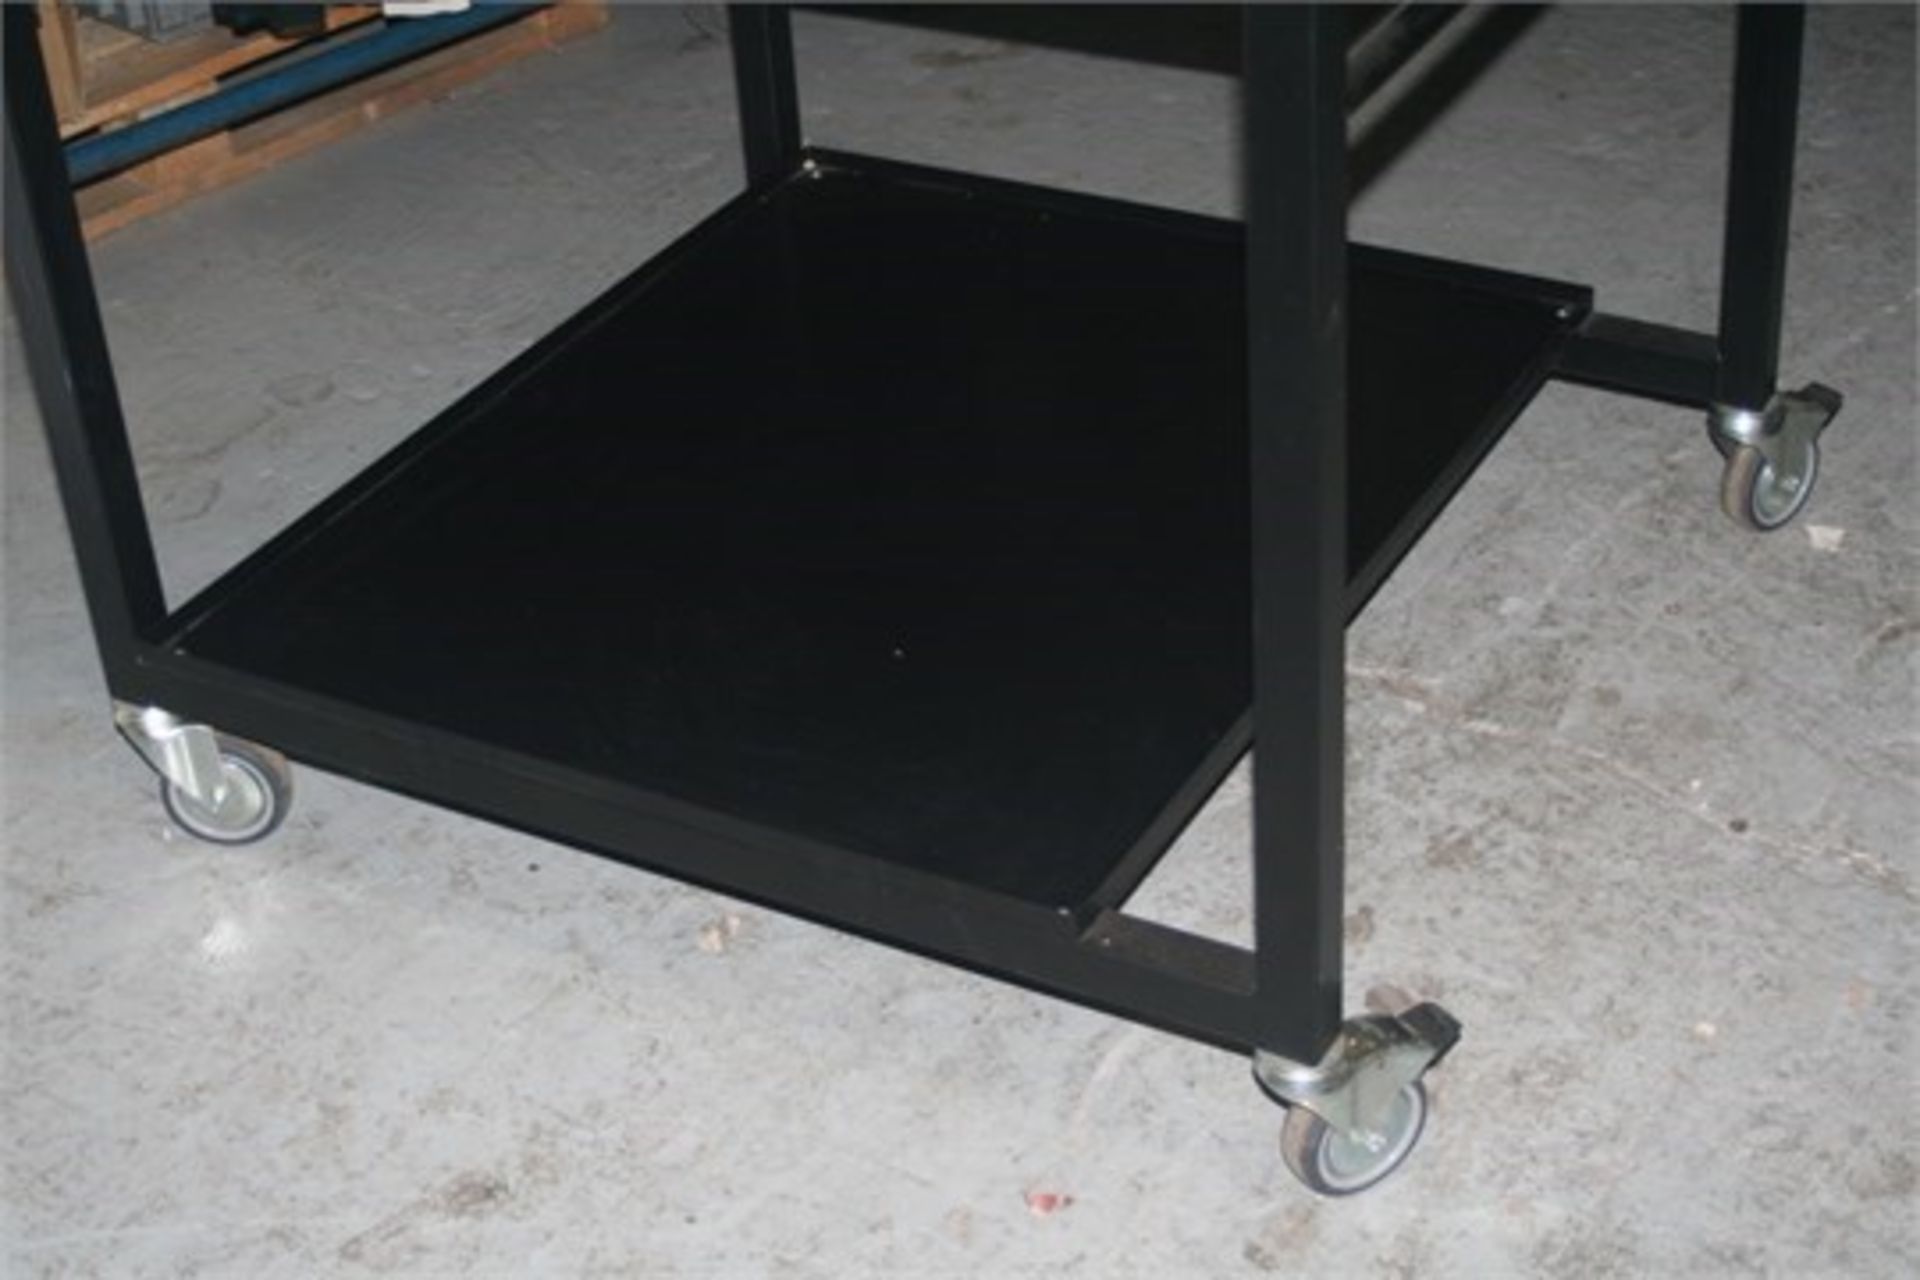 1 x Mobile Work Table - Large Size With Undershelf and Heavy Duty Castor Wheels - Strong Build - Image 4 of 8